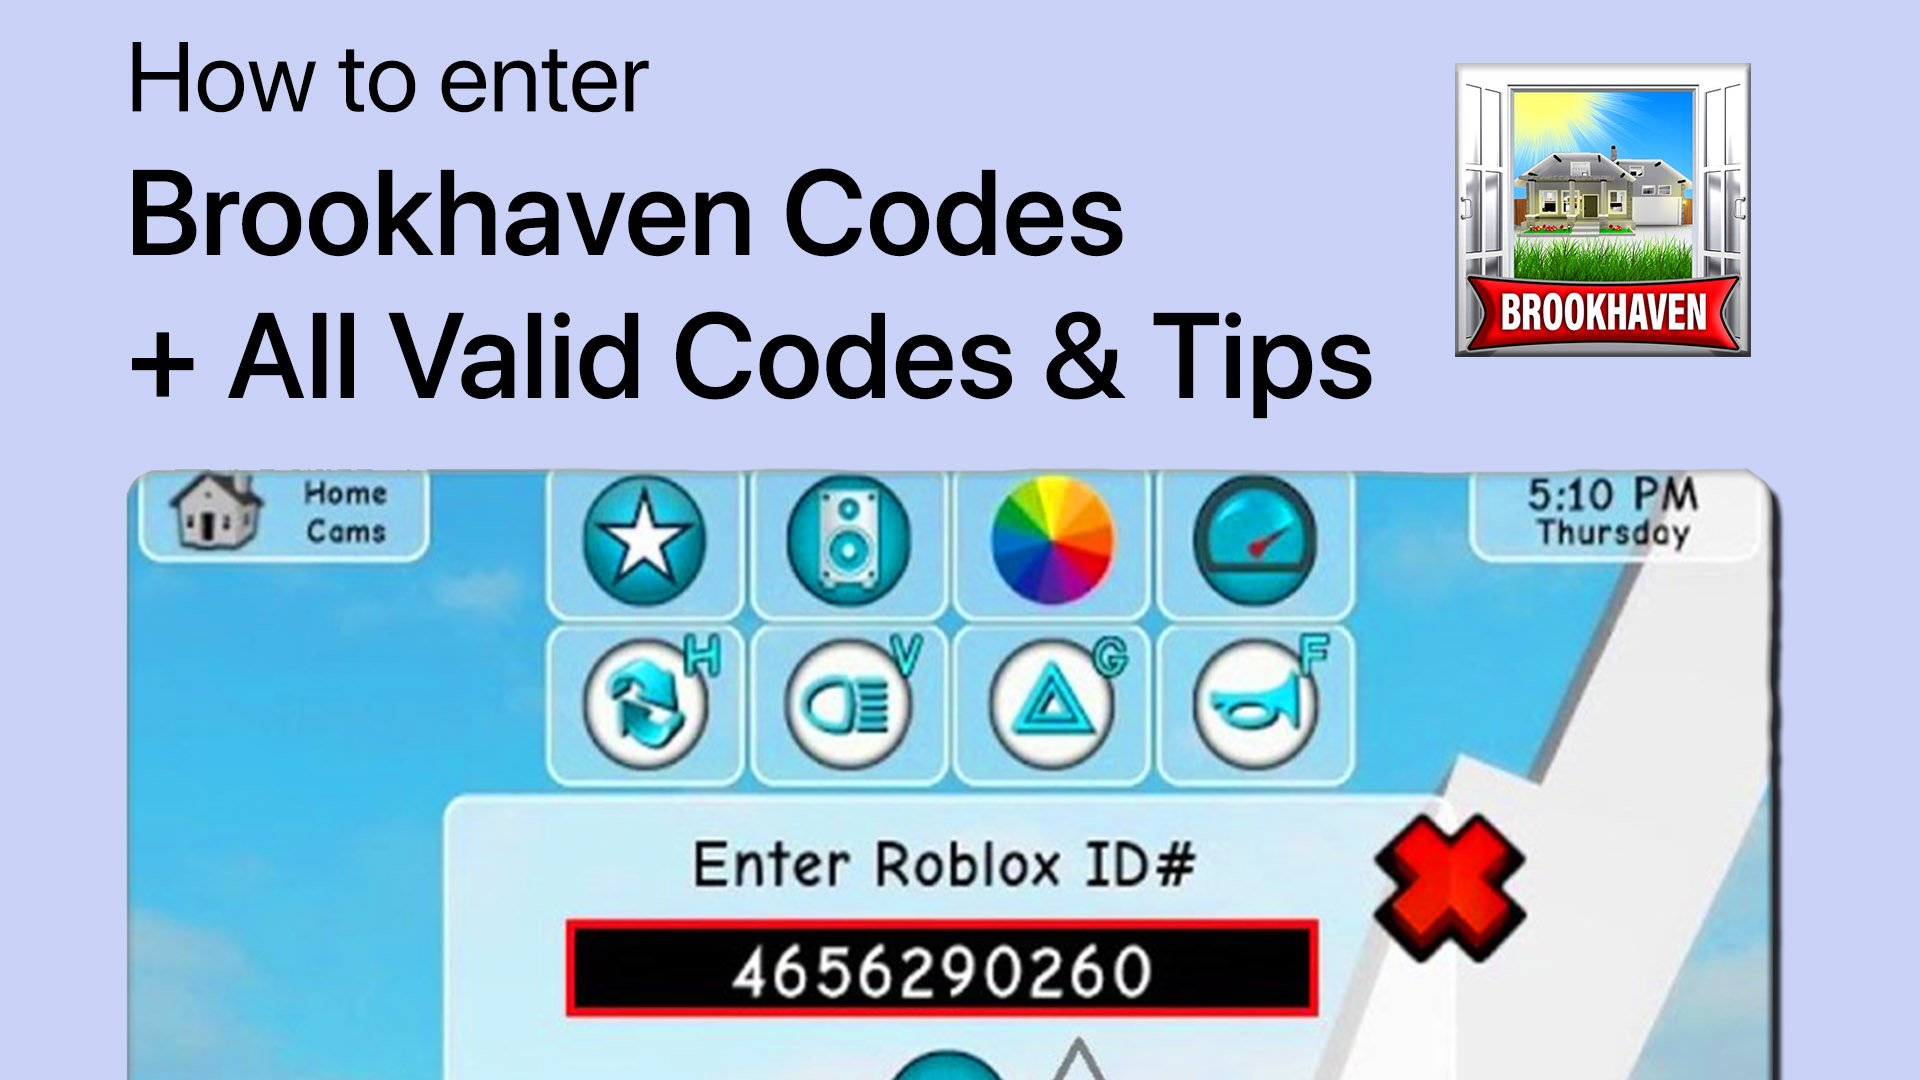 How To BECOME OBJECTS in Roblox Brookhaven RP! 😄🏡 *Brookhaven ID Codes* 